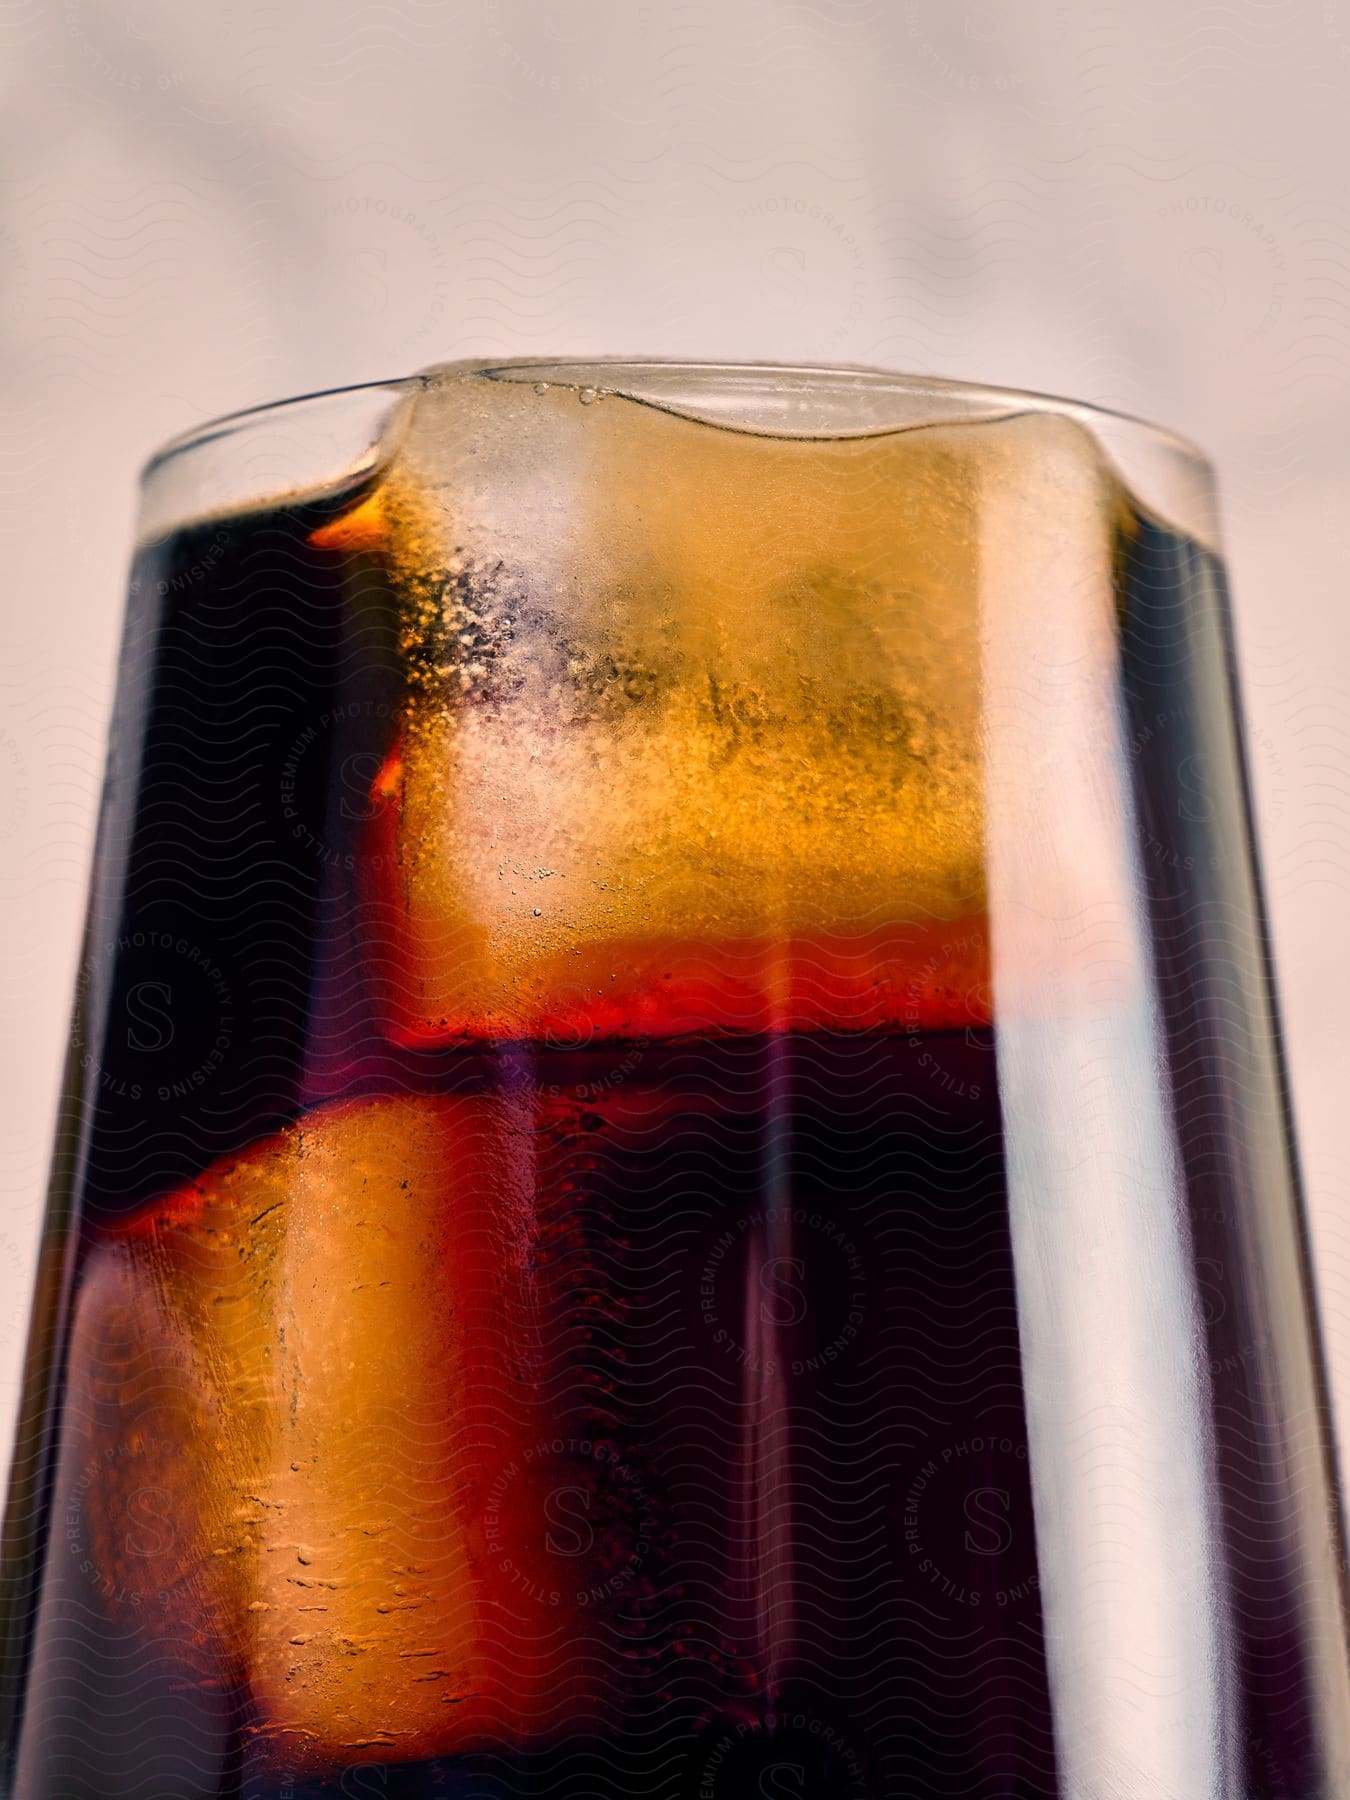 A glass of cola filled to the brim with a couple ice cubes in it